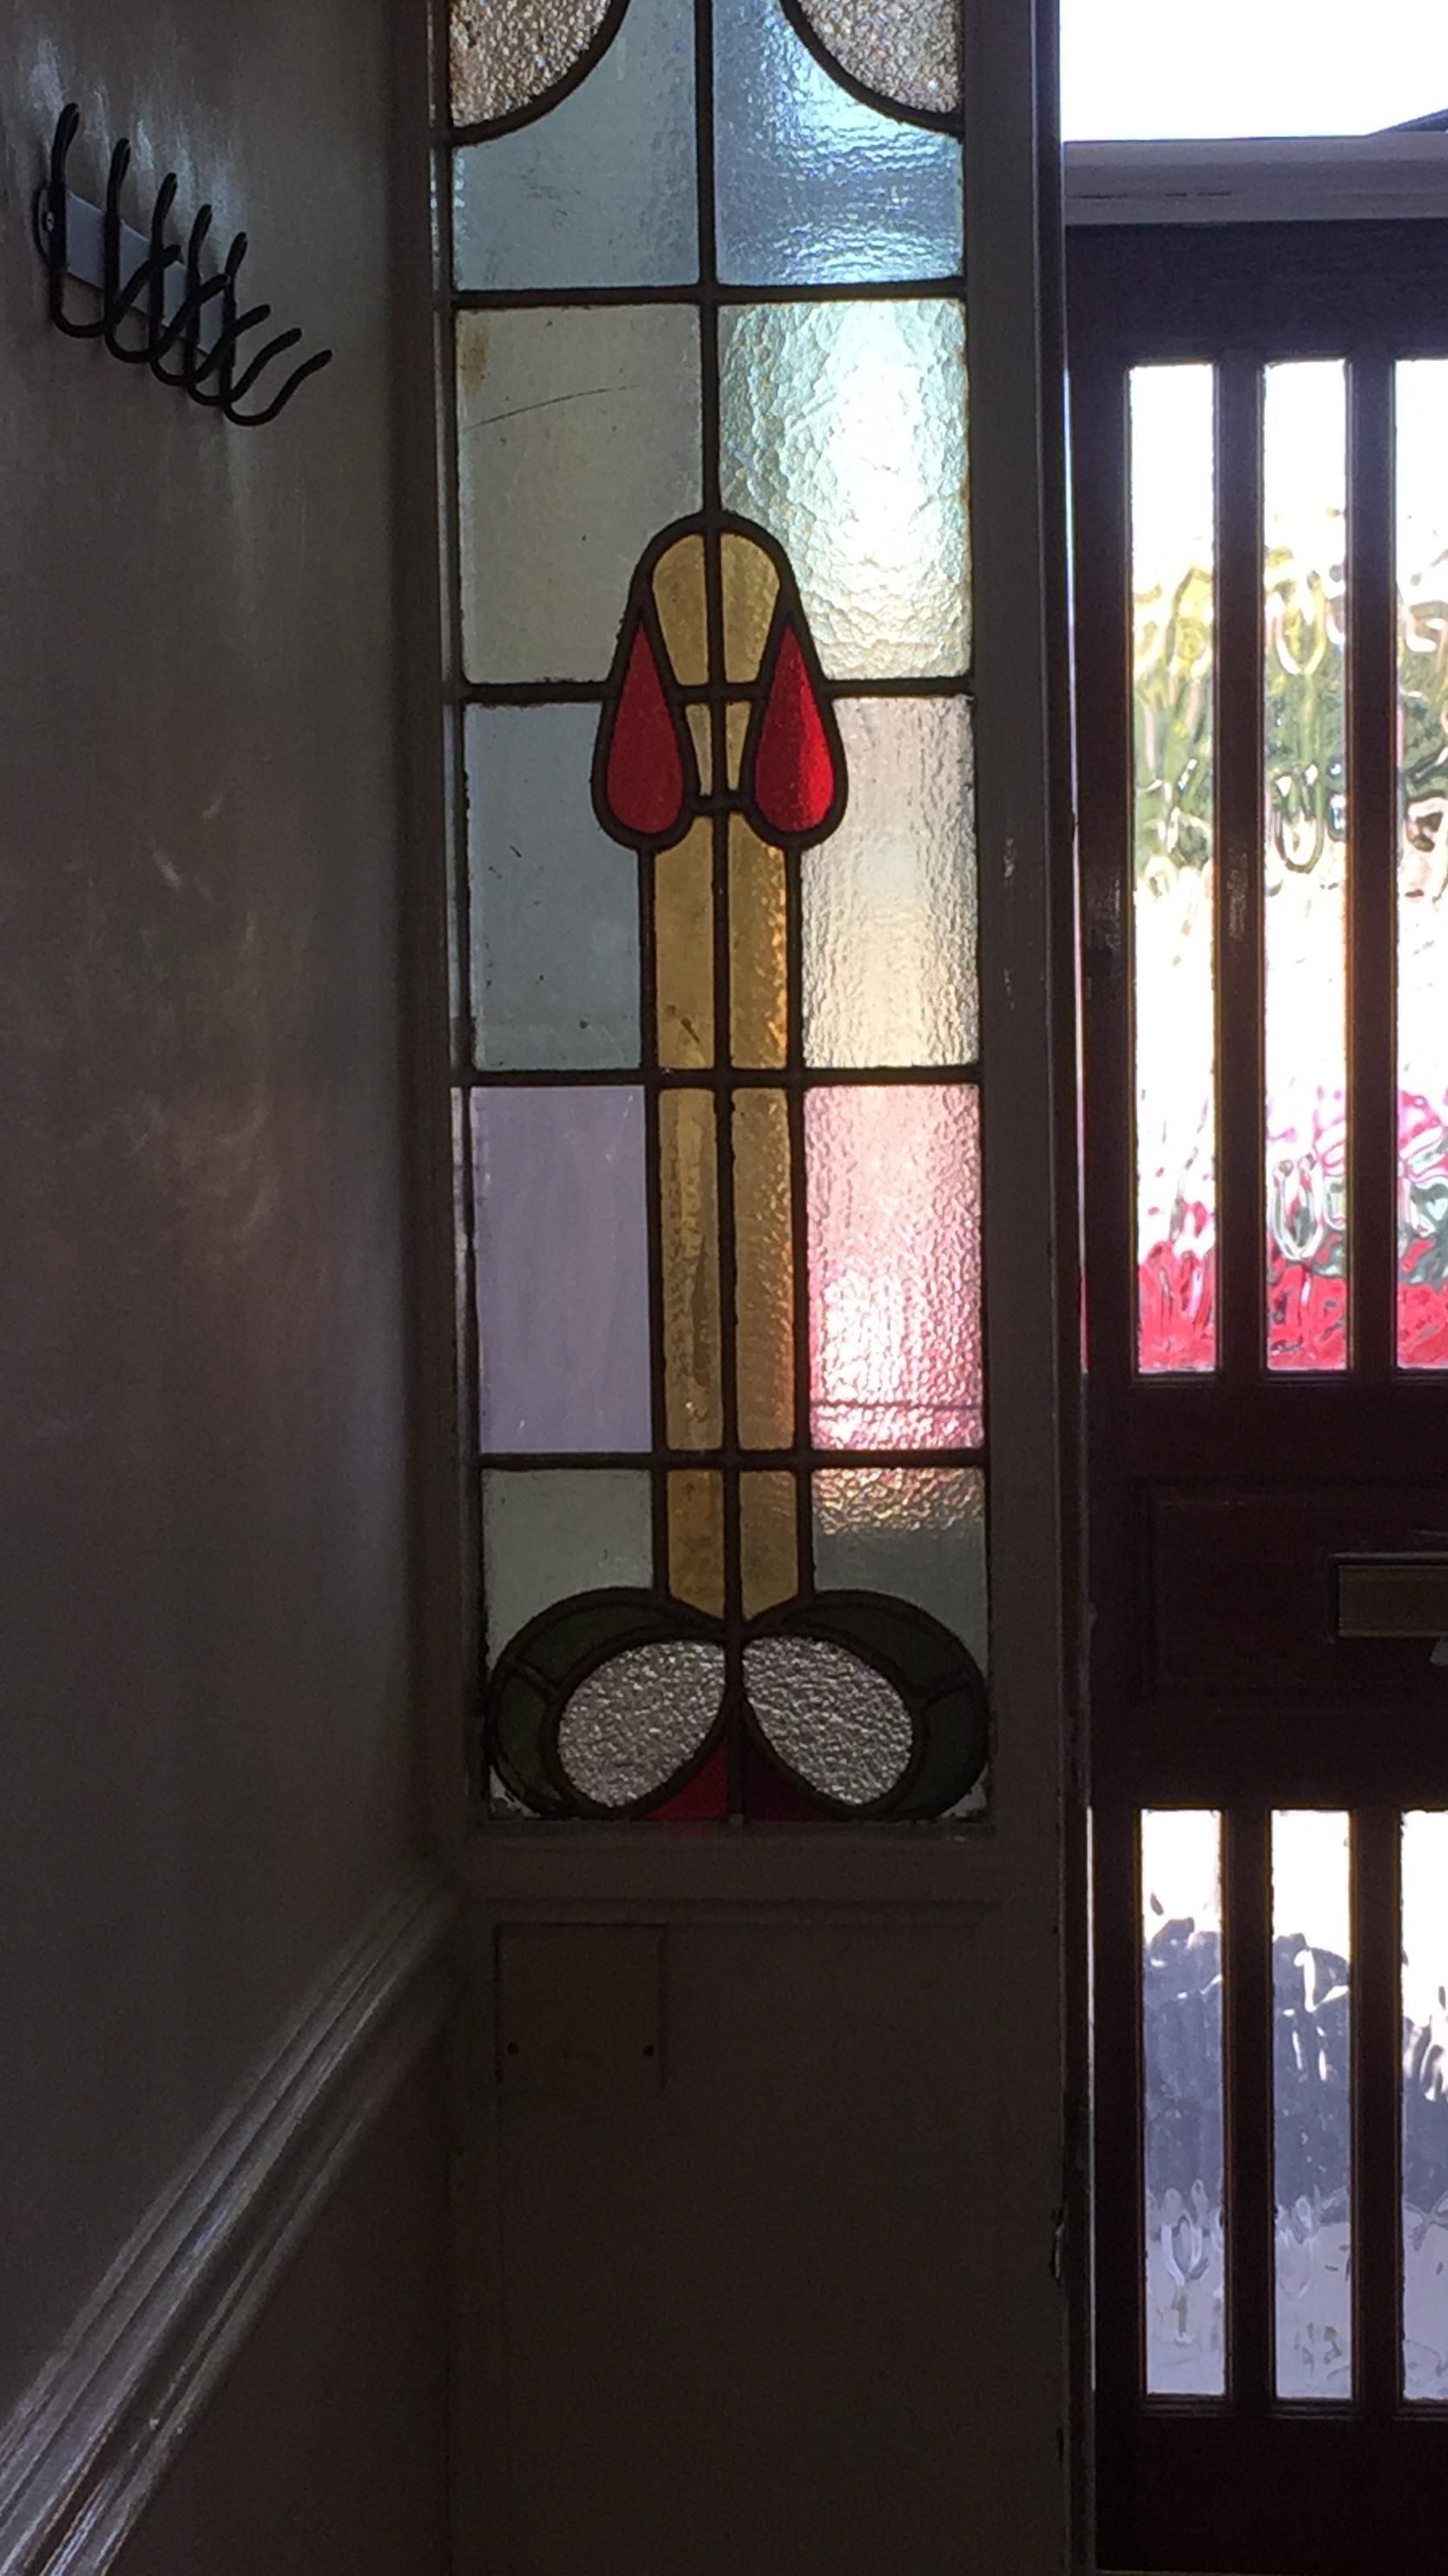 The stain glass windows in my new house